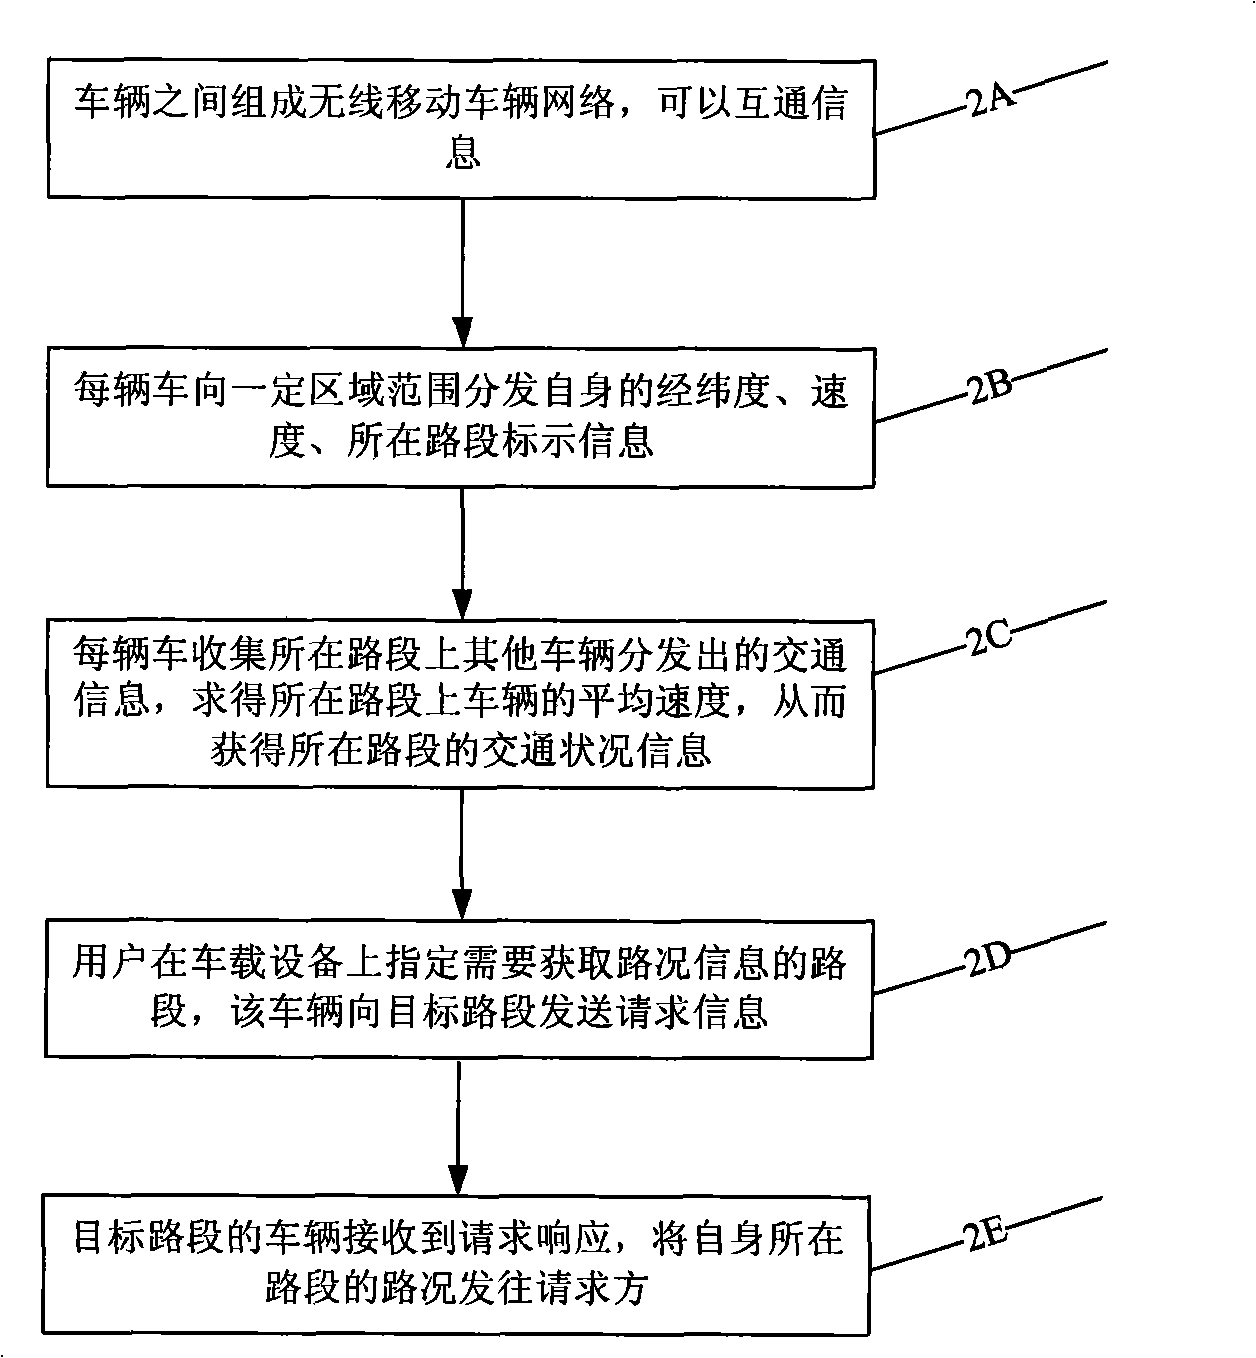 Wireless ad hoc network traffic navigation system and method based on multi-source data